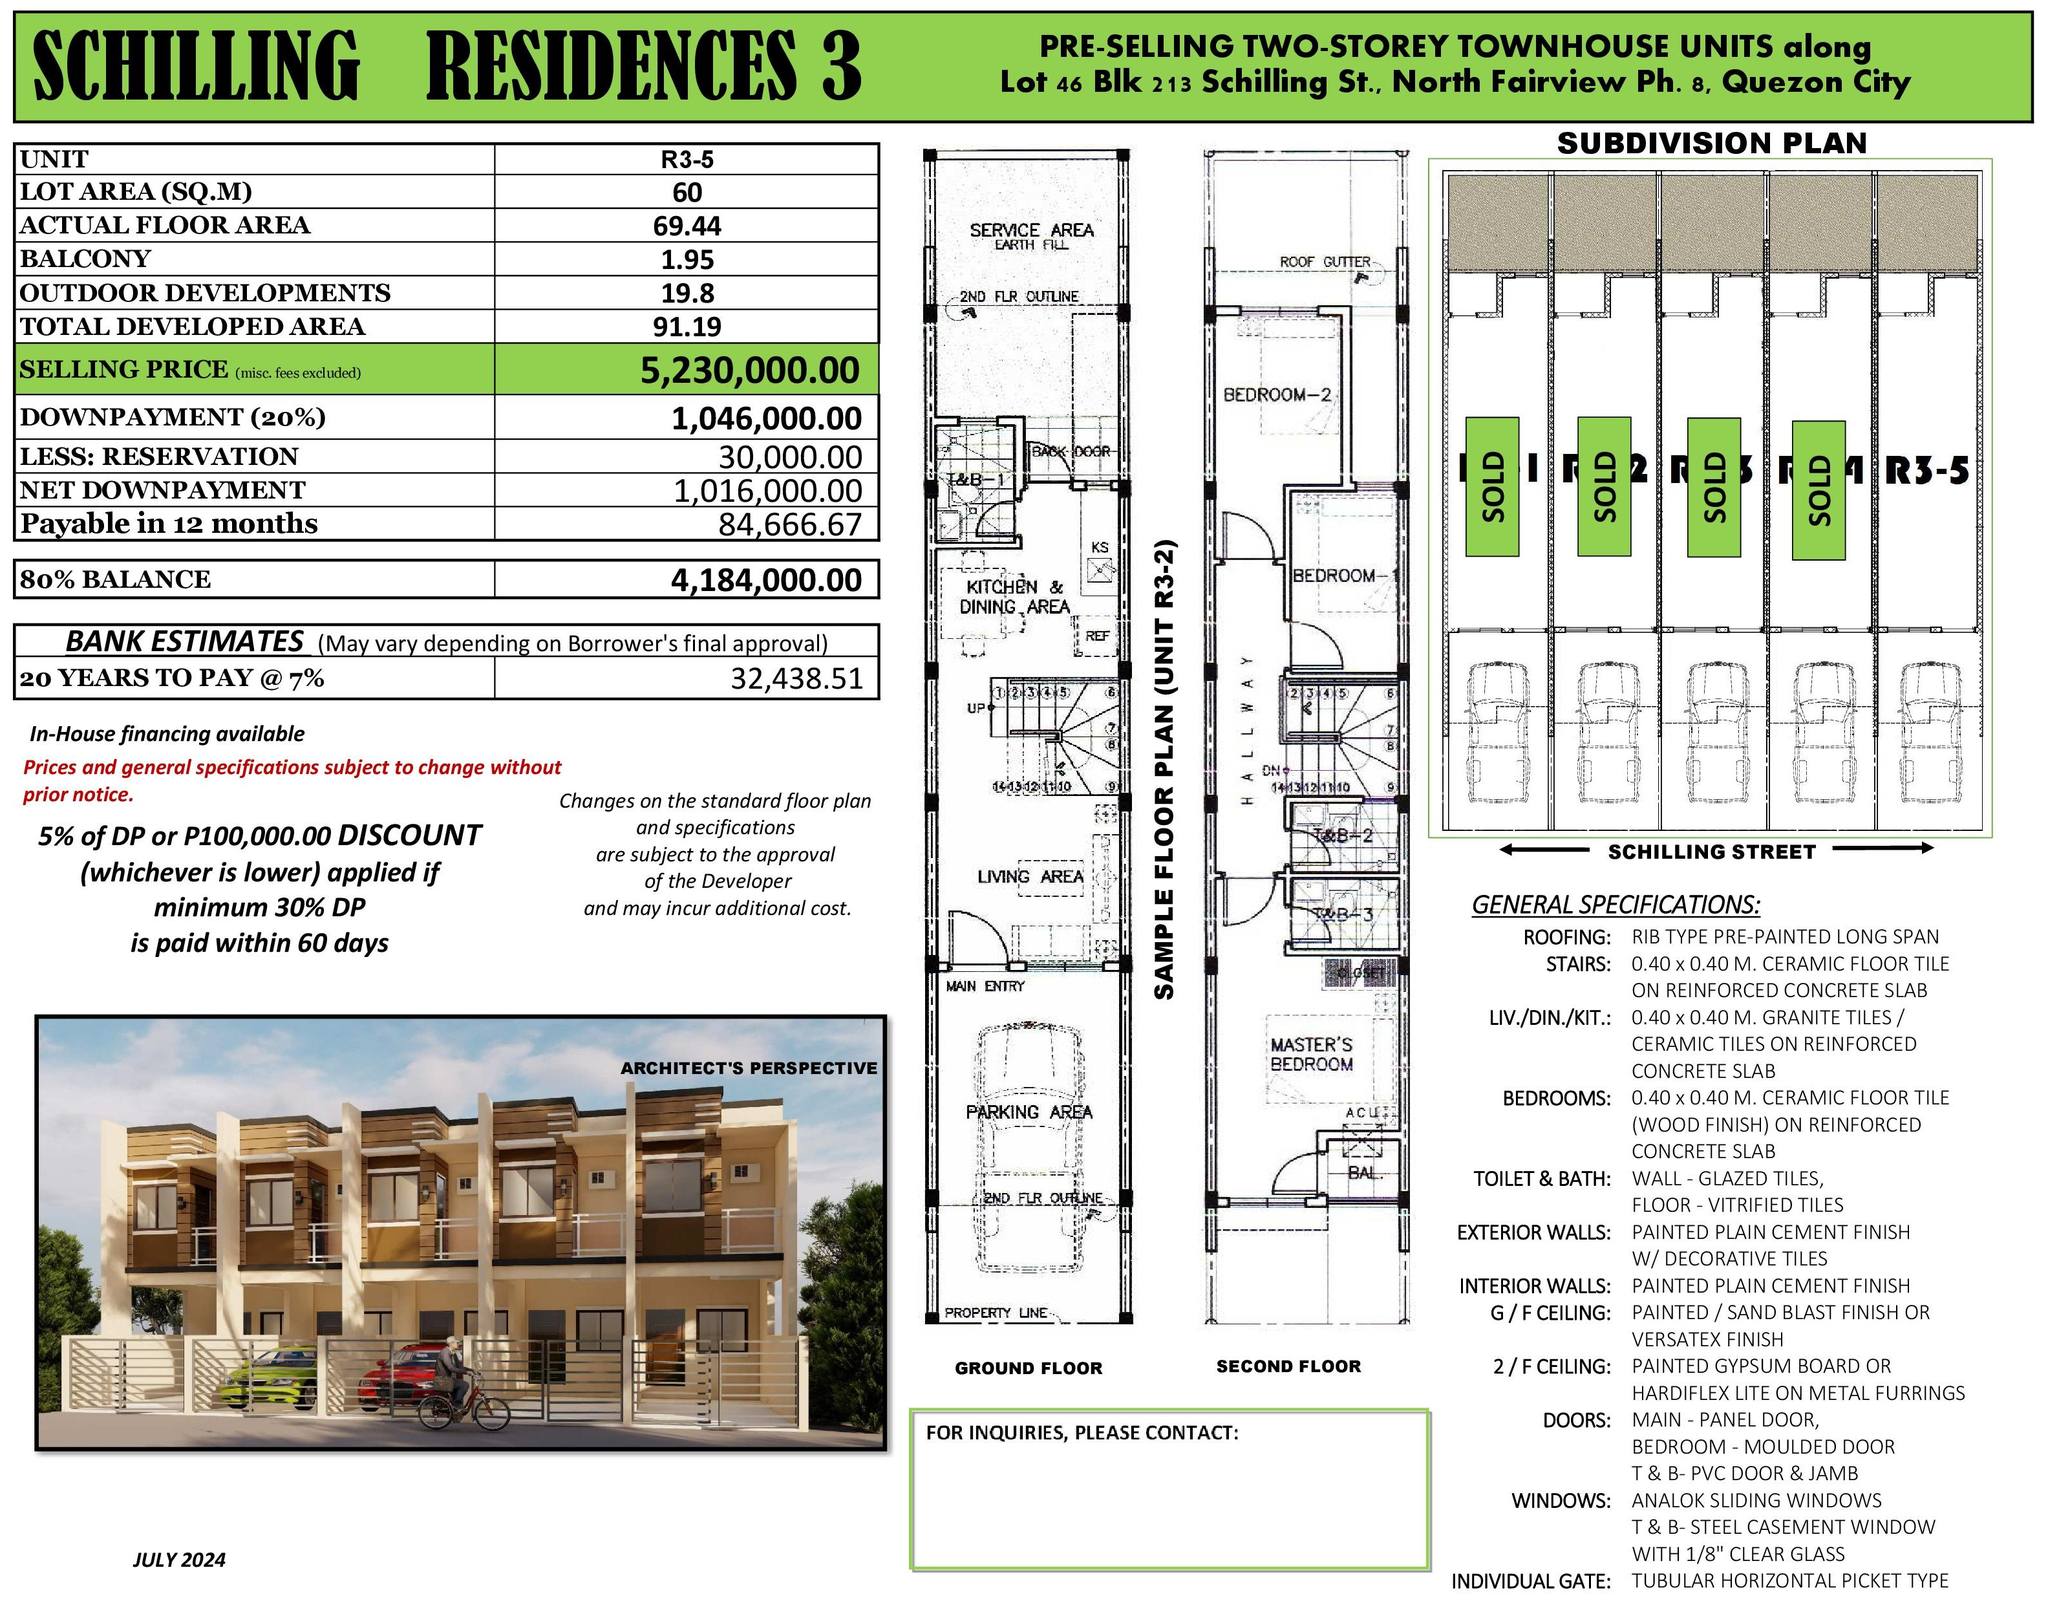 Schilling Residences III, North Fairview Phase 8